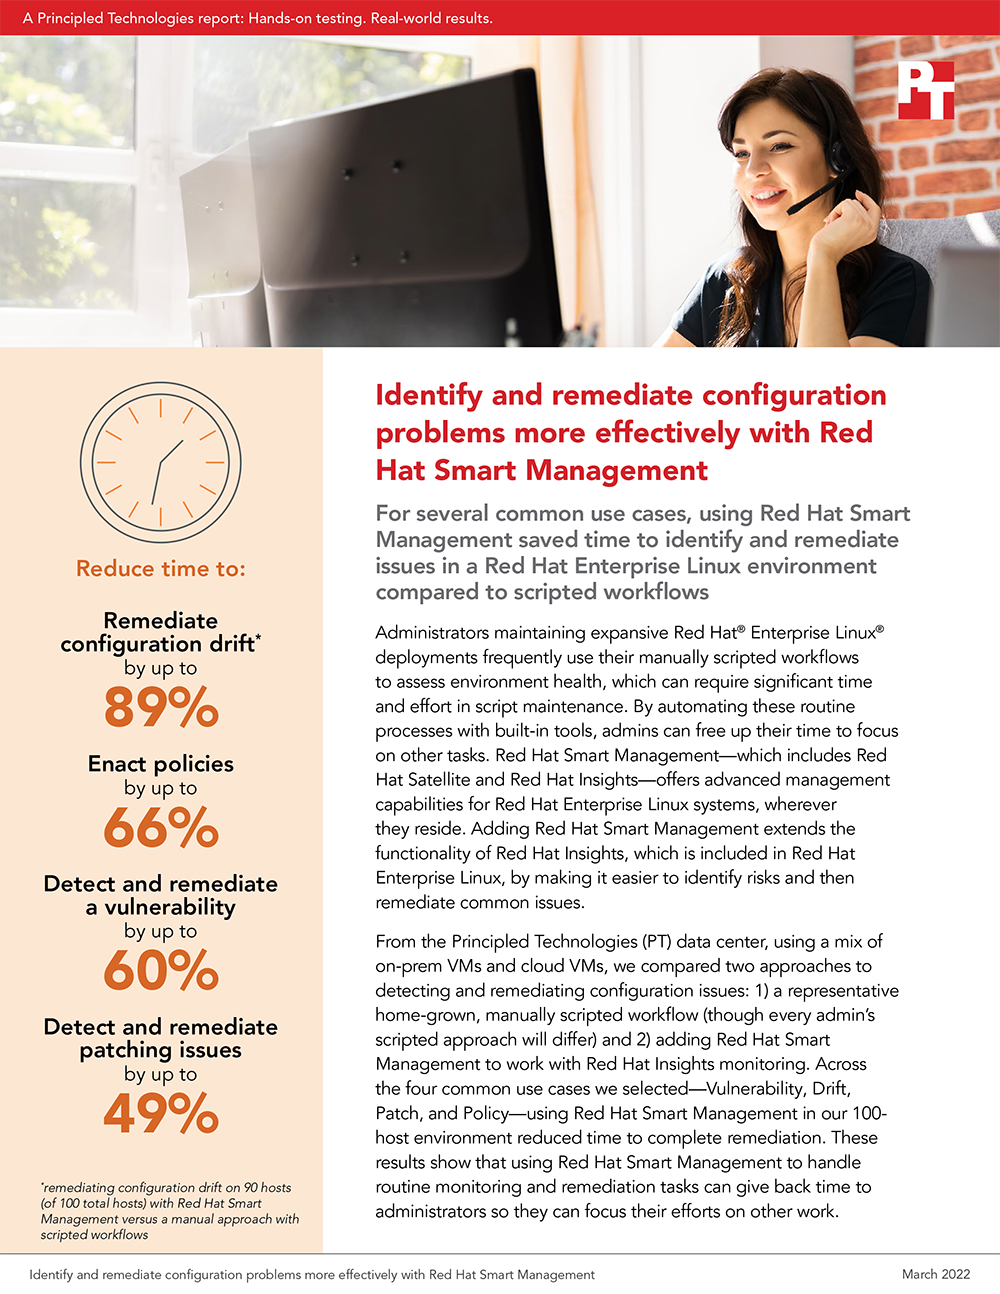 Principled Technologies Releases Study Comparing Remediation with Red Hat Smart Management vs. a Manual, Scripted Workflow on Four Common Maintenance Use Cases